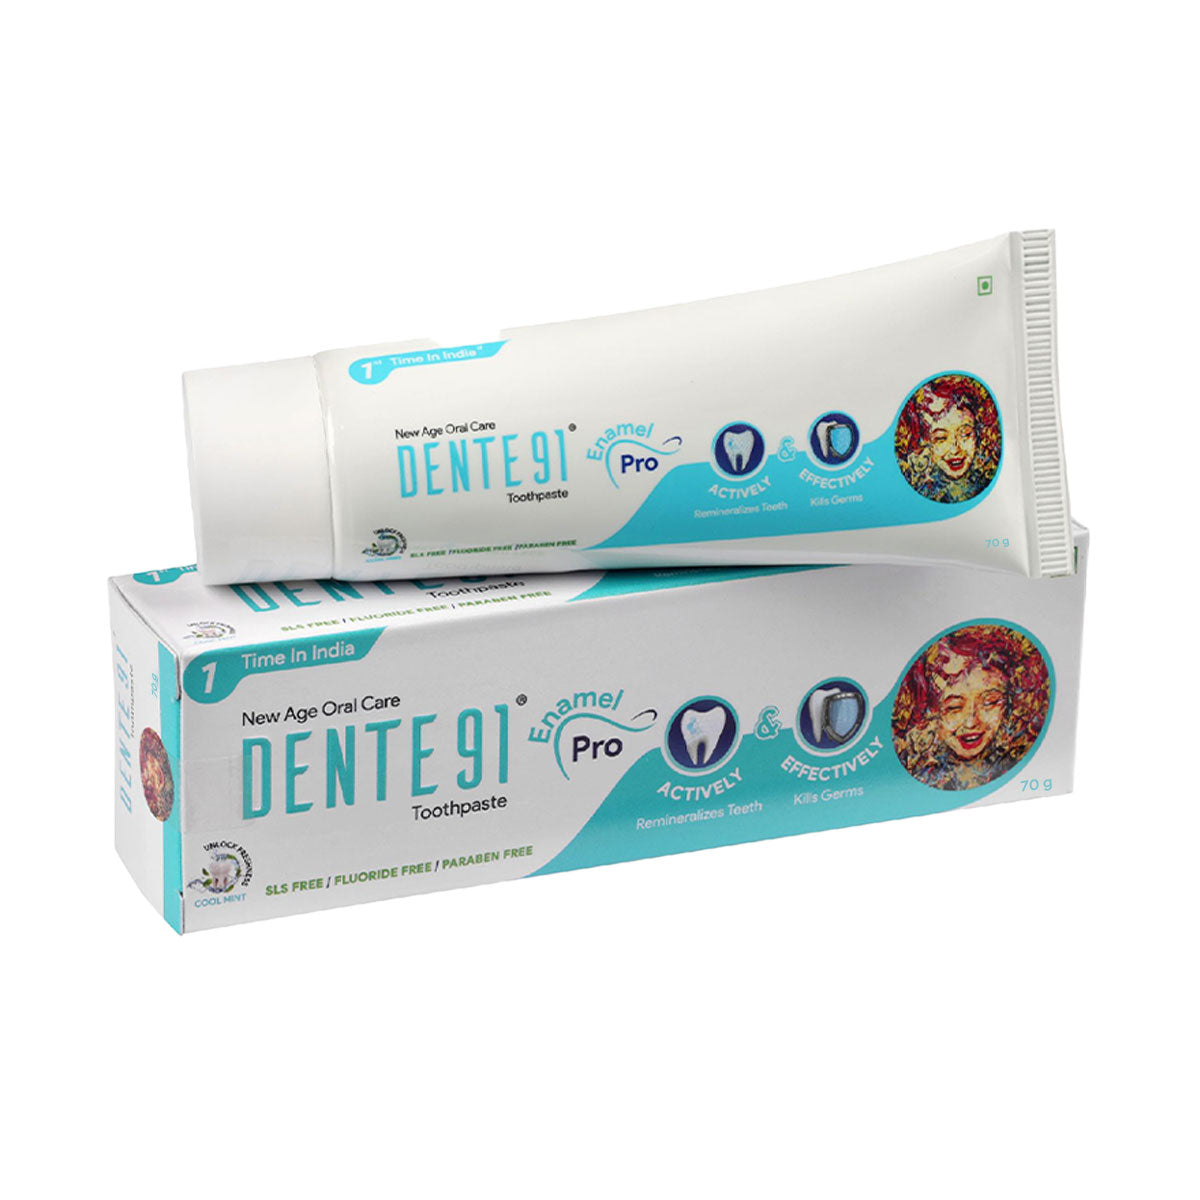 Dente91 Cool Mint Toothpaste, Strengthens Enamel, Repairs Cavities, Remineralizes Teeth , Sensitivity Relief, SLS Free, Fluoride Free, Paraben Free, Pack of 1, 70g